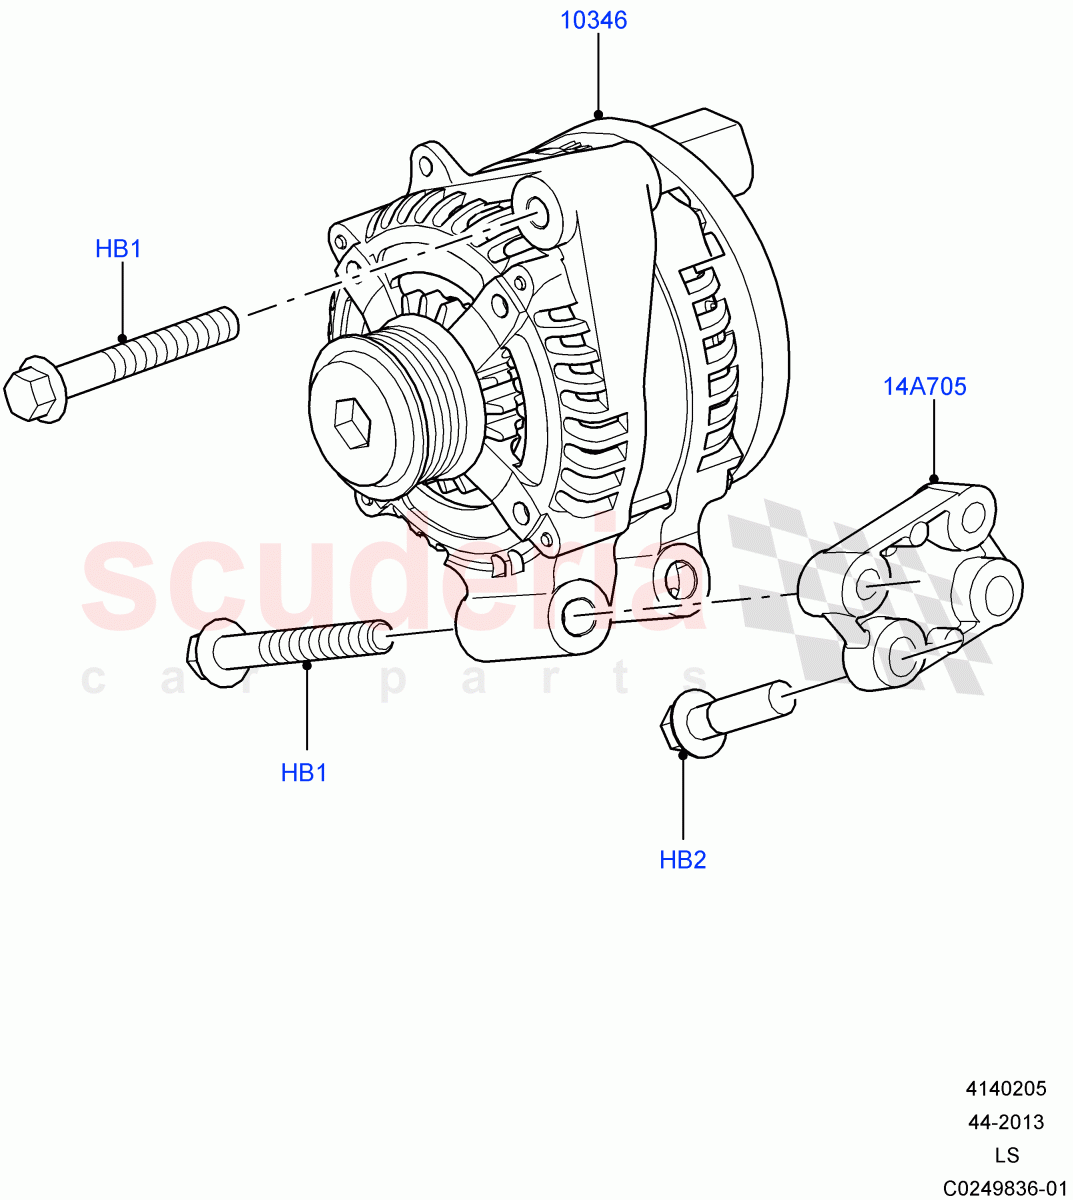 Alternator And Mountings(3.0L DOHC GDI SC V6 PETROL)((V)FROMEA000001) of Land Rover Land Rover Discovery 4 (2010-2016) [3.0 Diesel 24V DOHC TC]